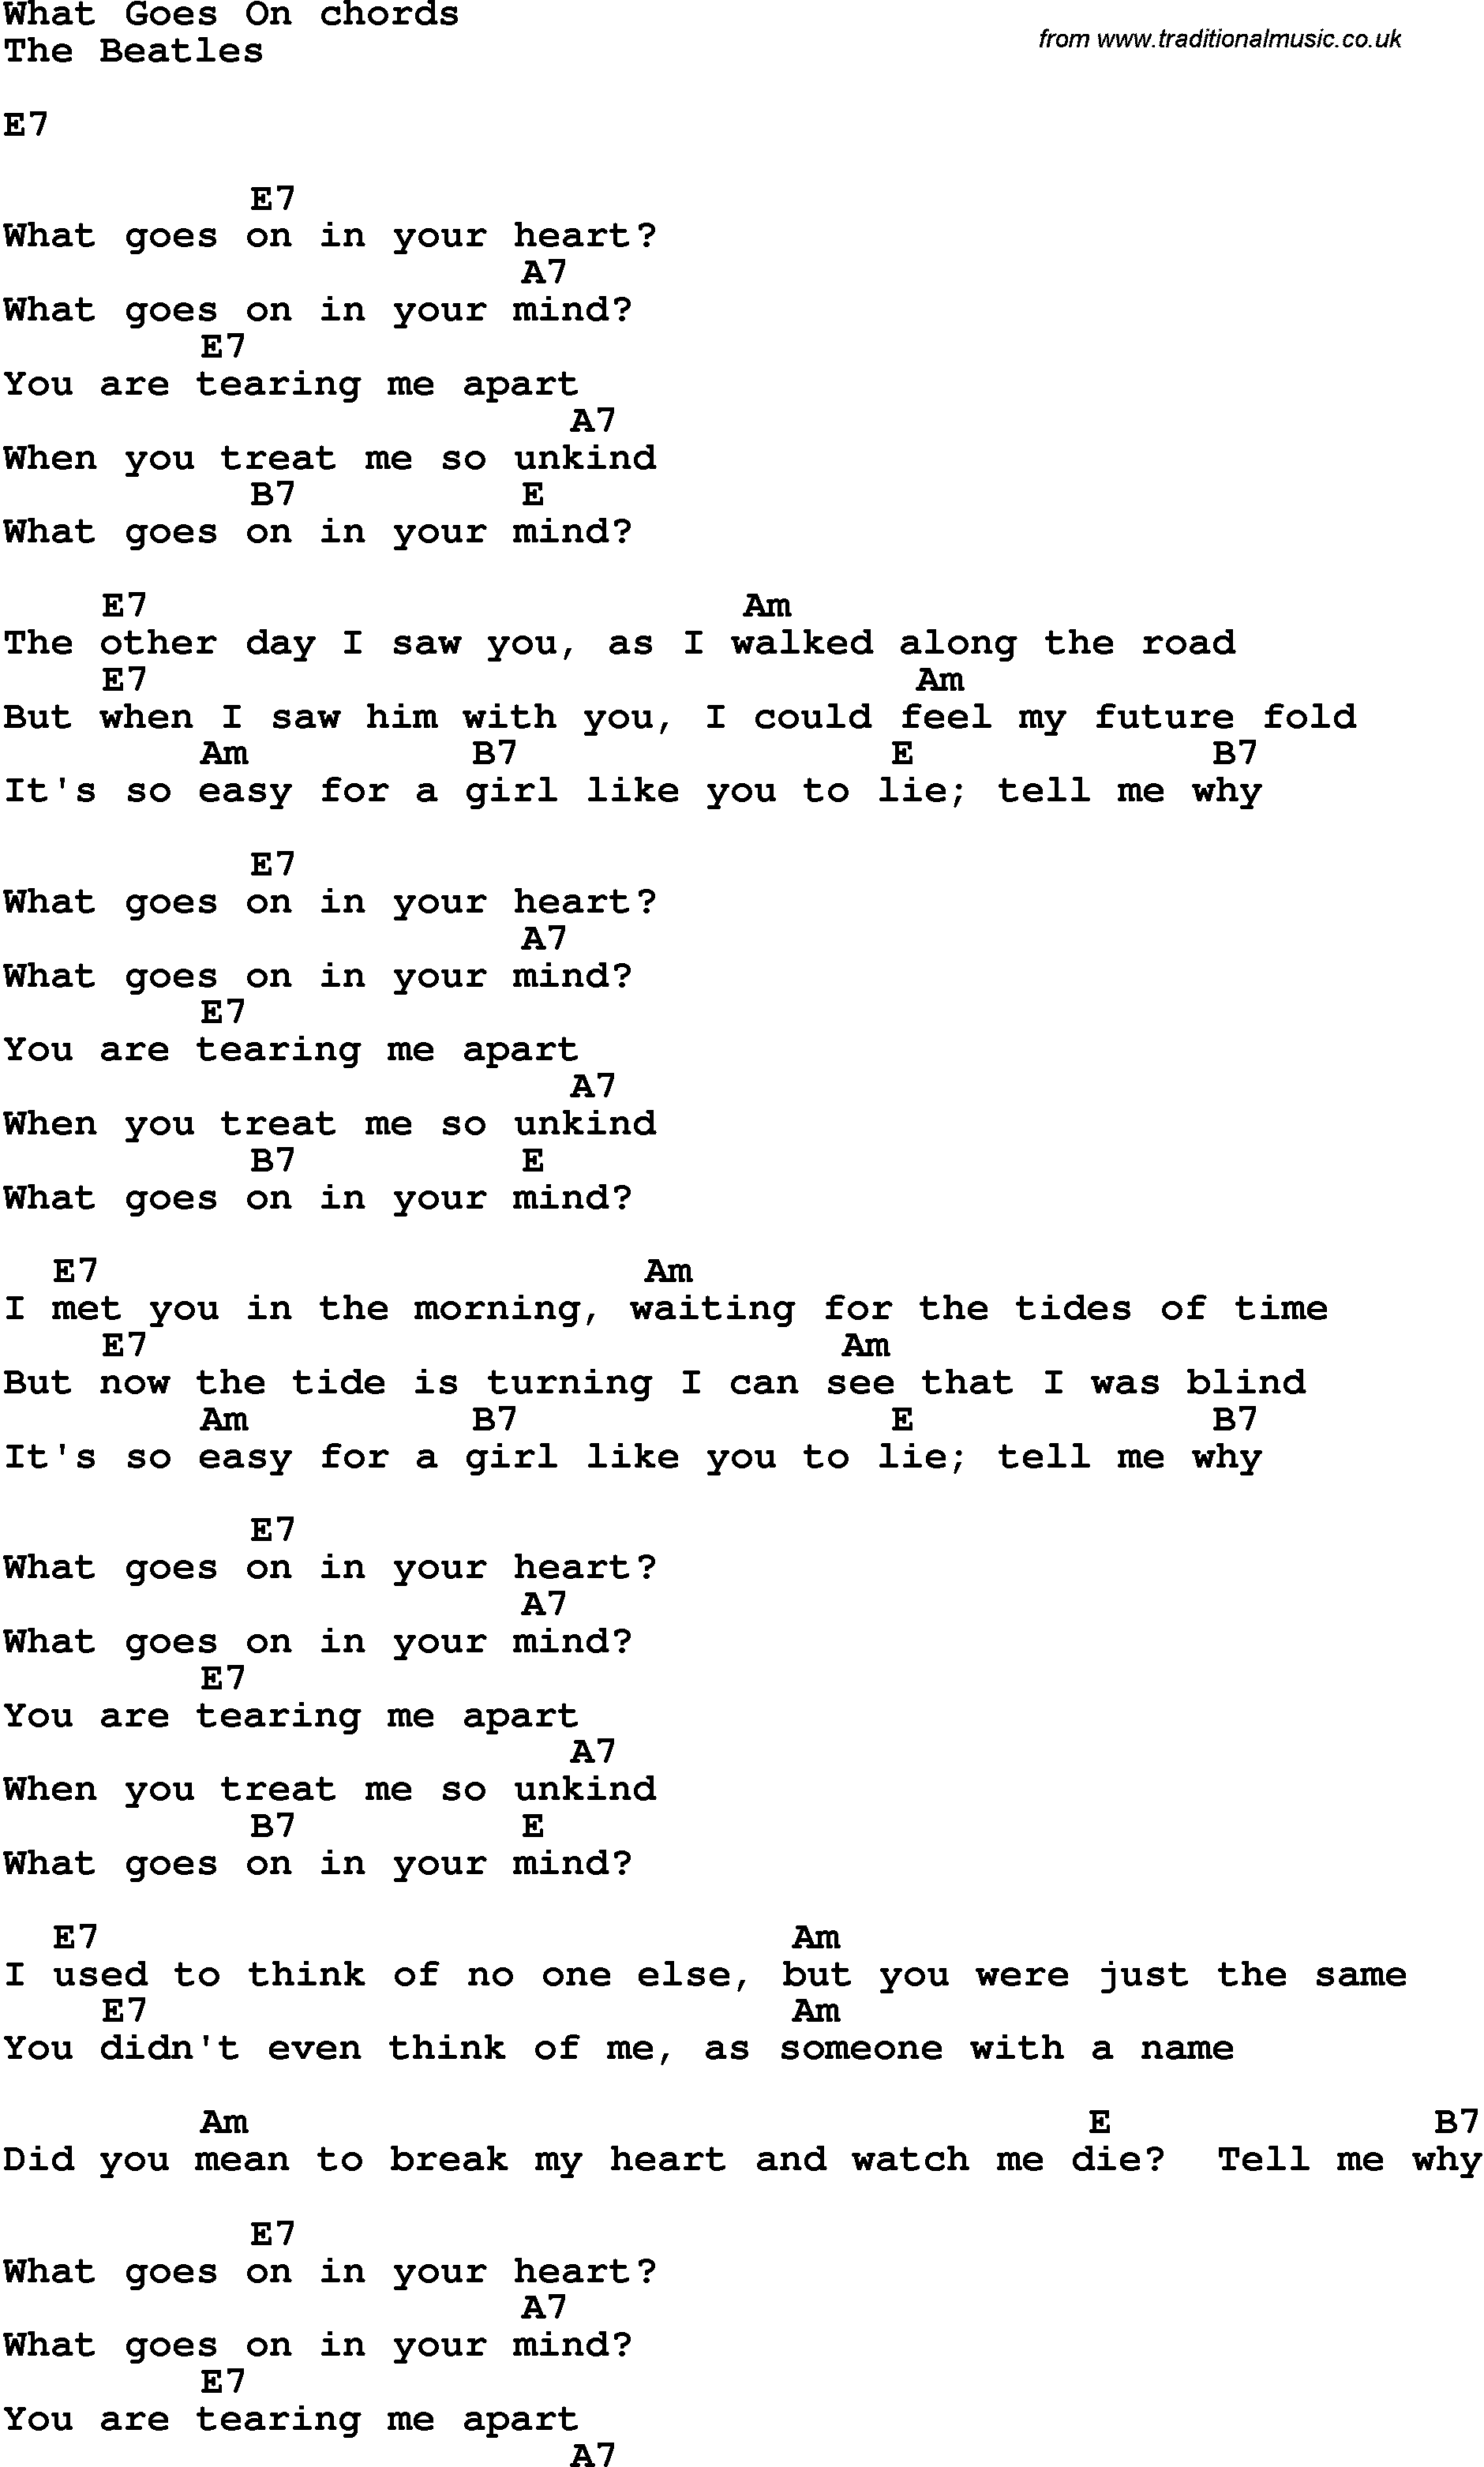 Song Lyrics with guitar chords for What Goes On